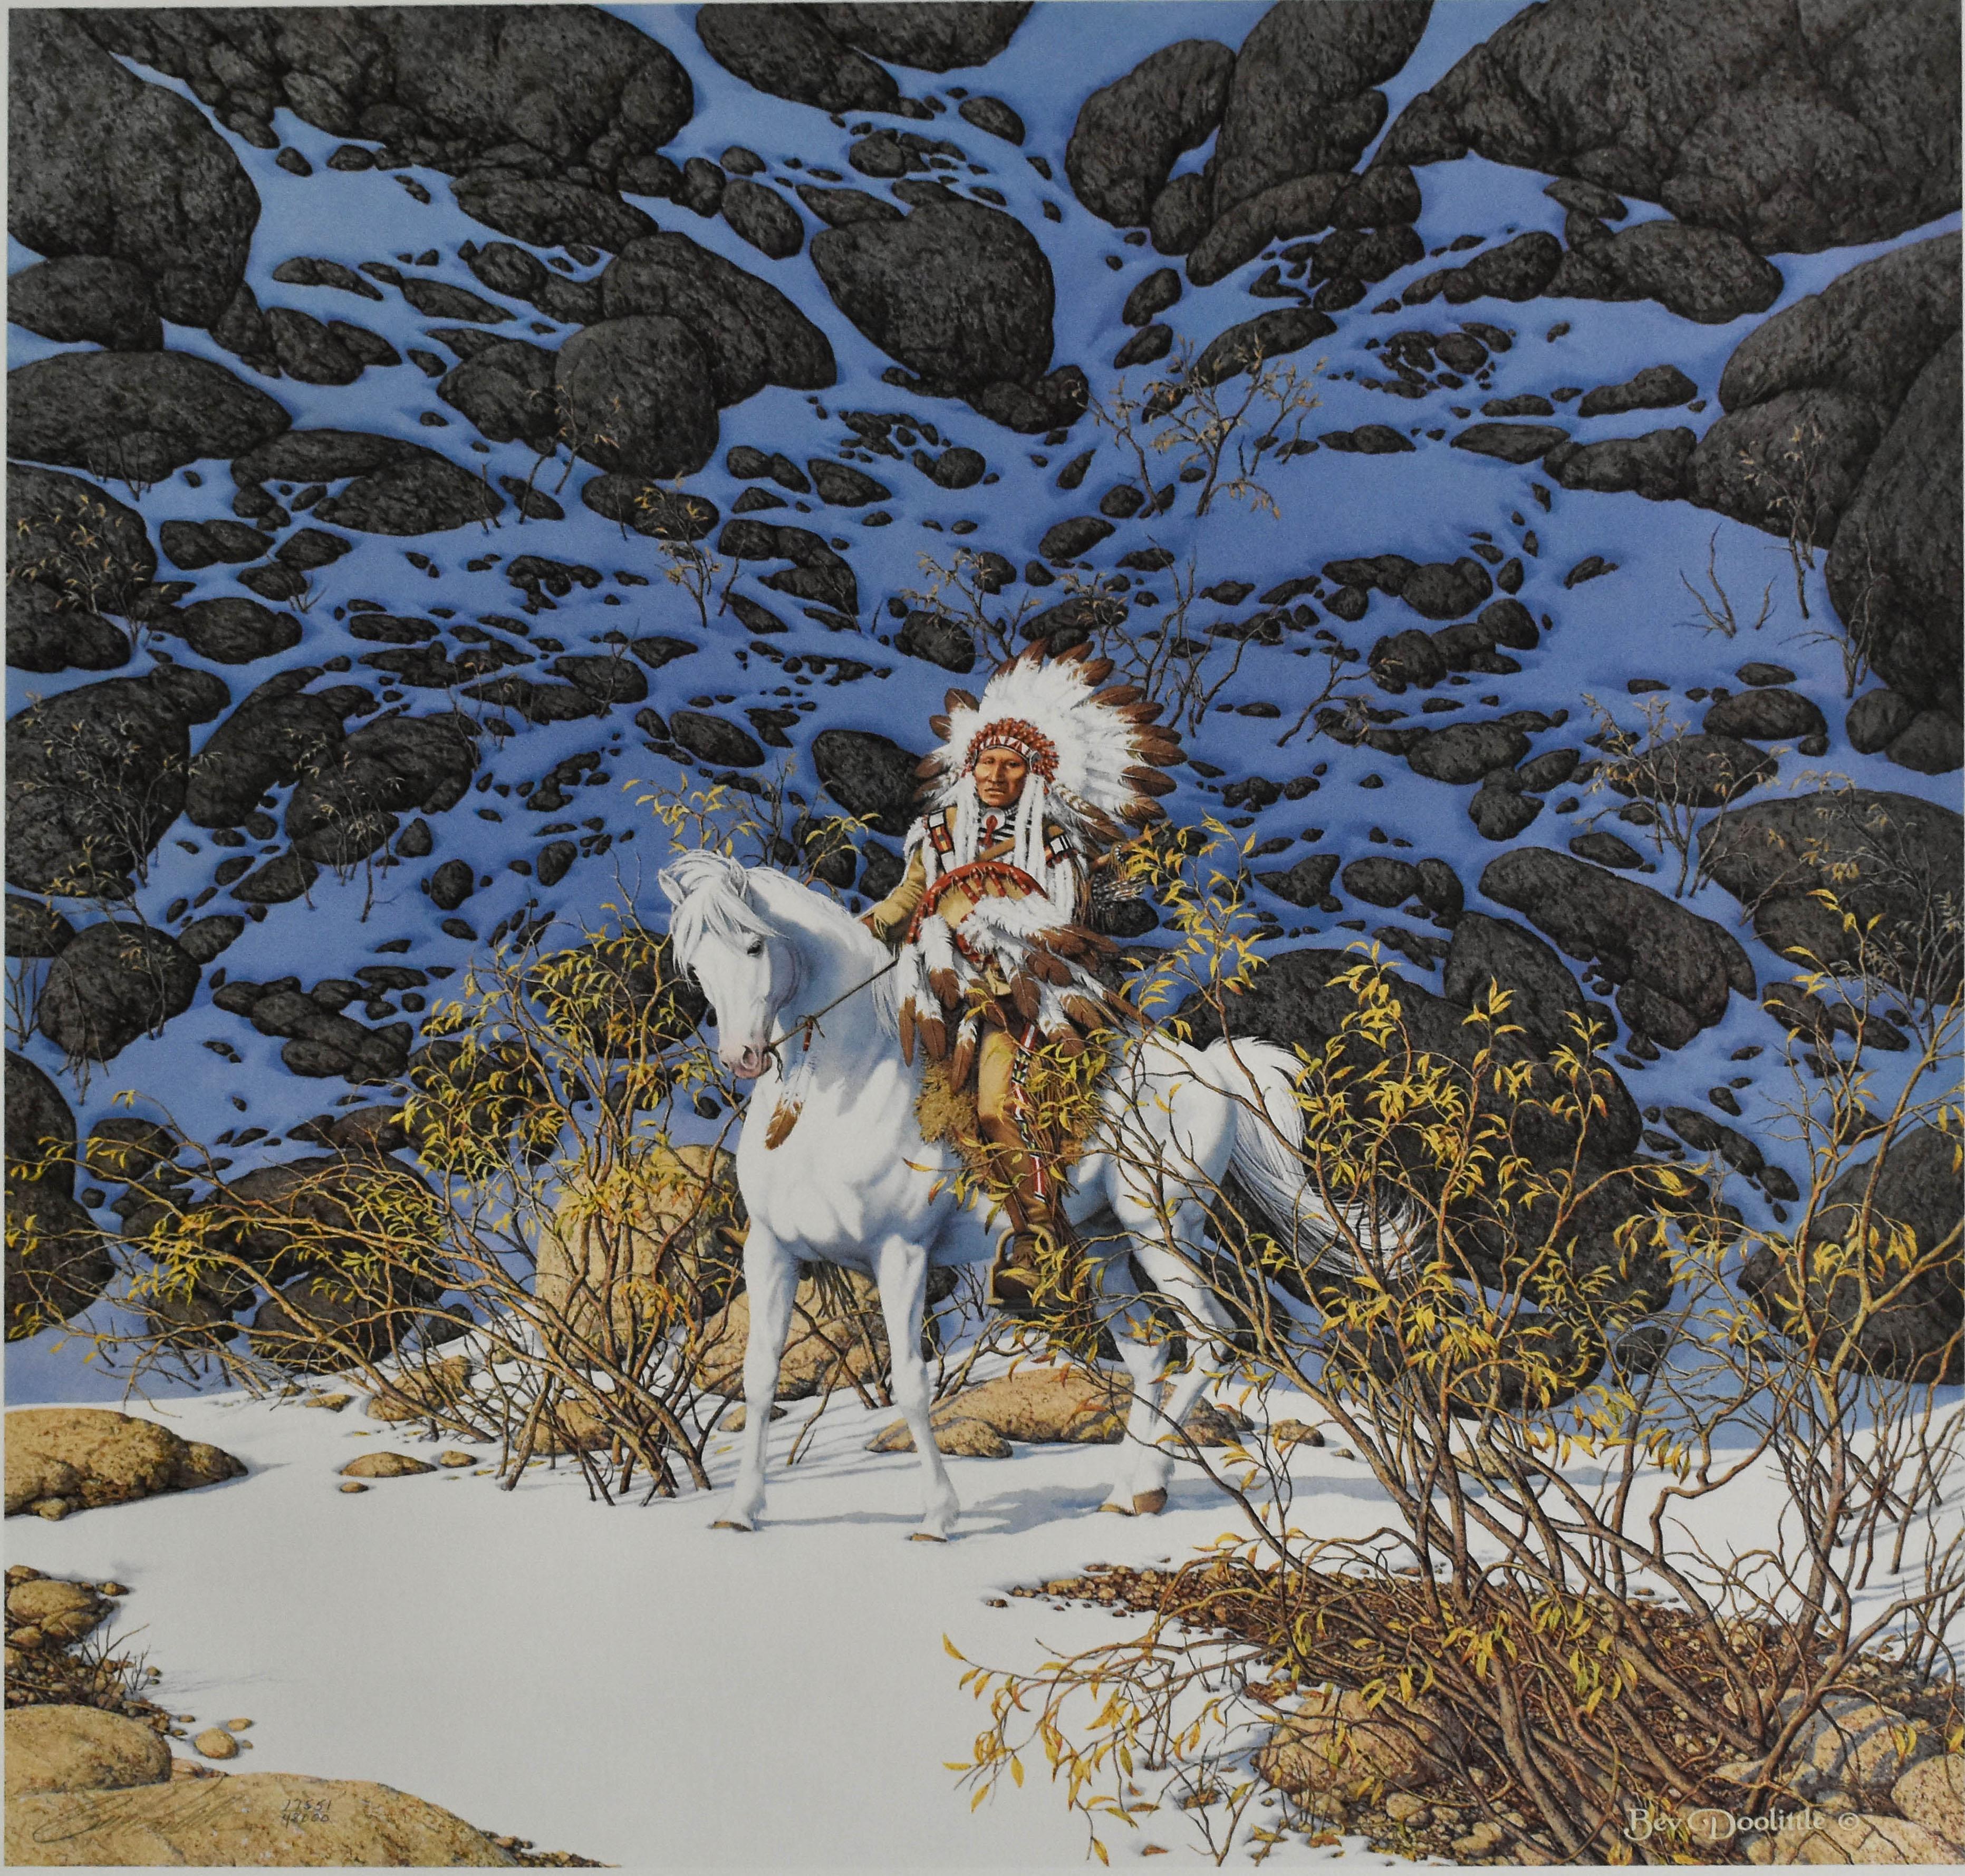 "Eagle Heart" Serigraph 19 x 19 1/2  Signed and Numbered, hidden eagles - Print by Bev Doolittle